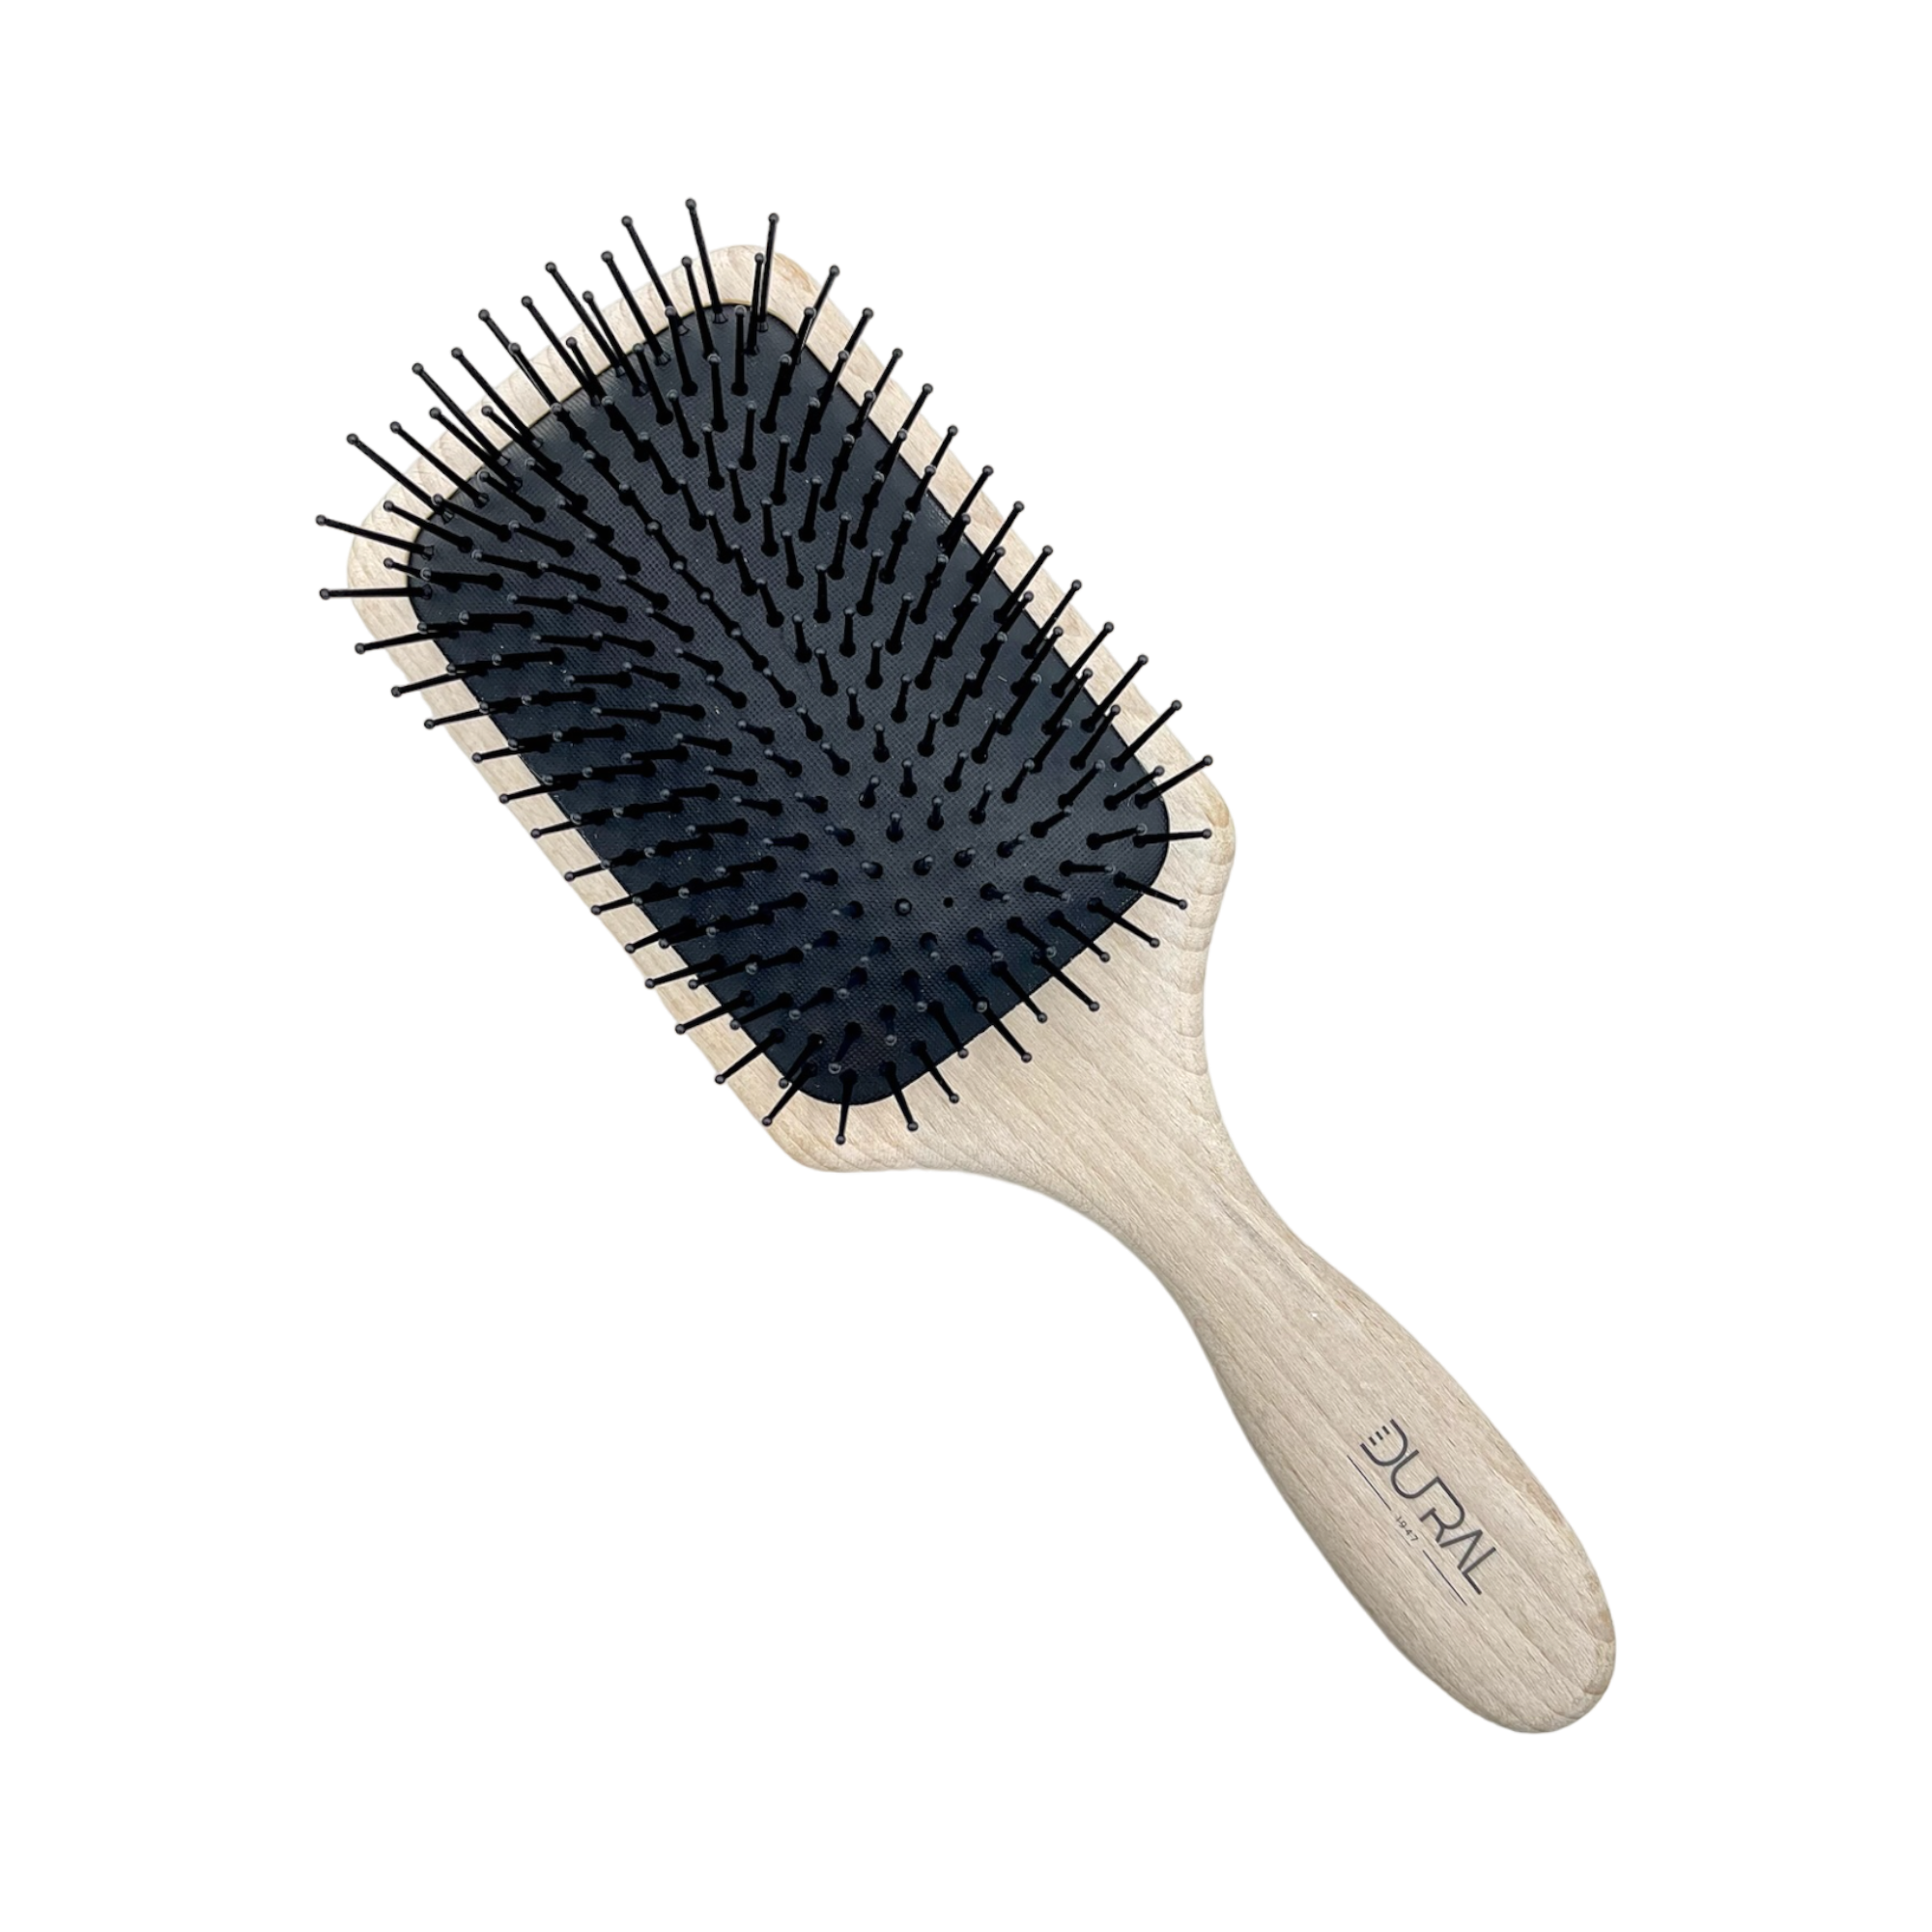 Dural Beech wood paddle brush with plastic pins and ball tips